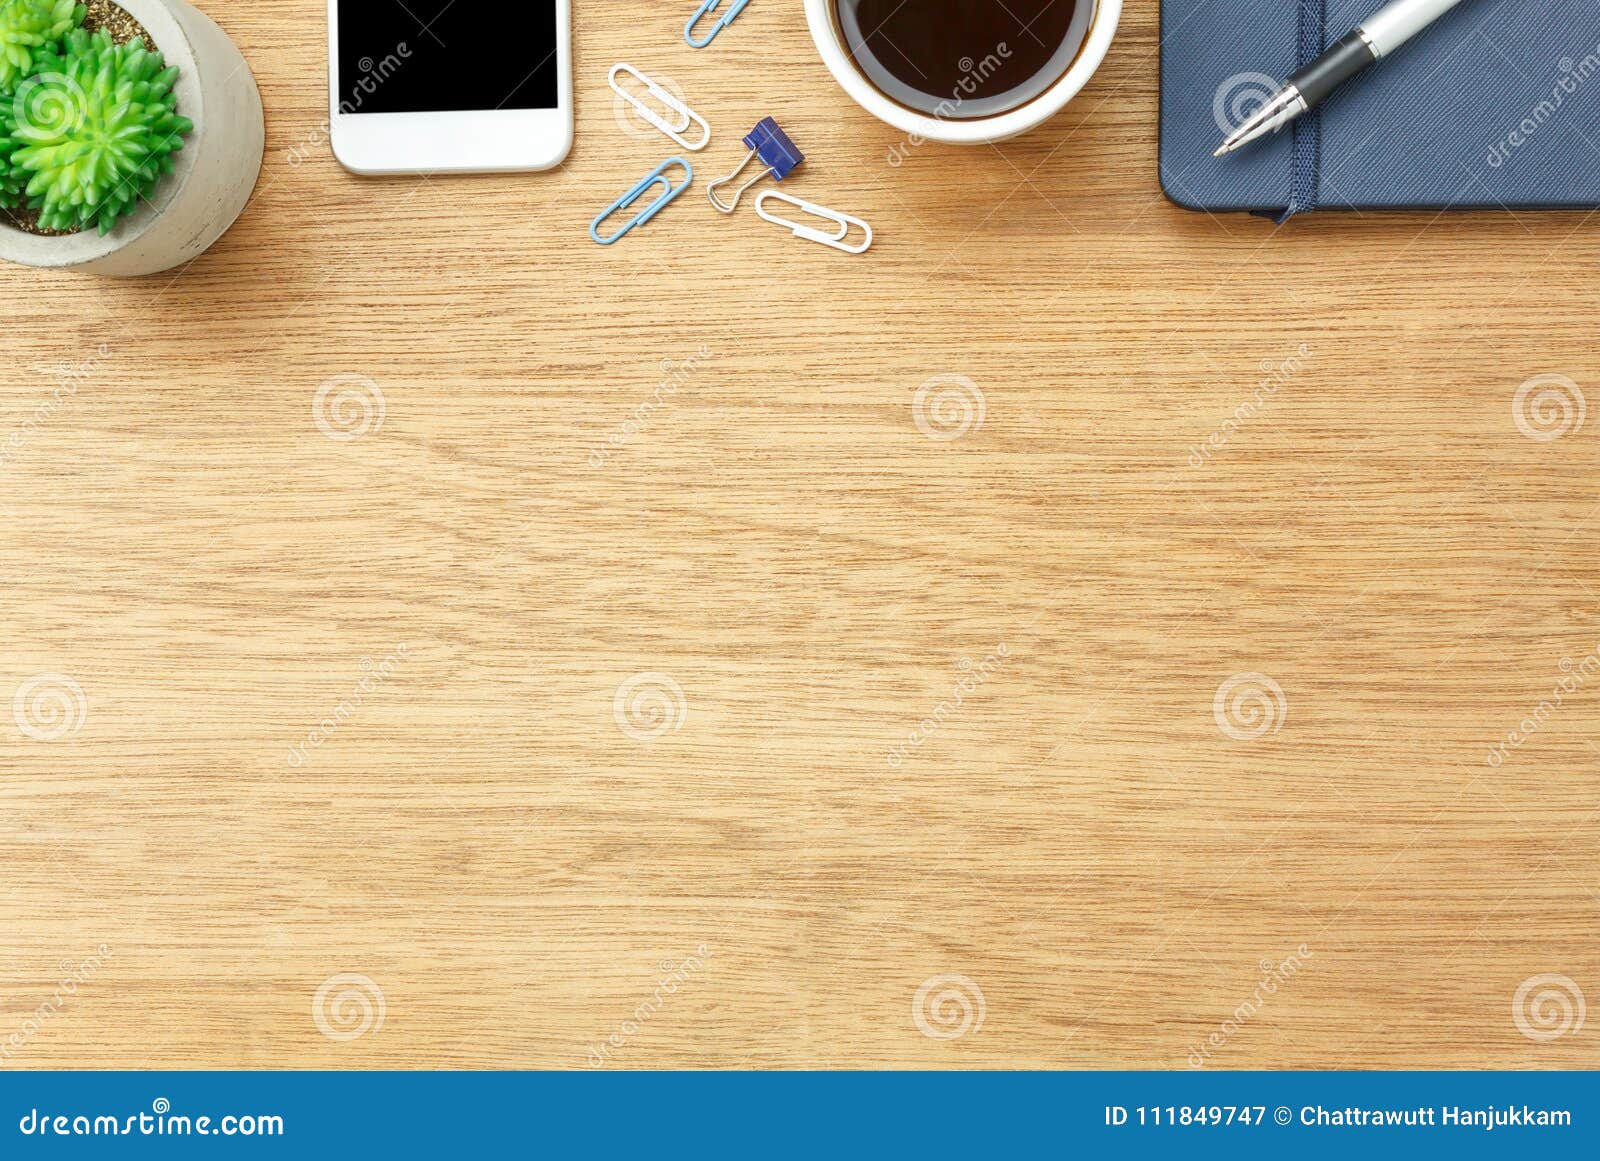 Table Top View Aerial Image Stationary on Office Desk Background Stock  Image - Image of design, concept: 111849747